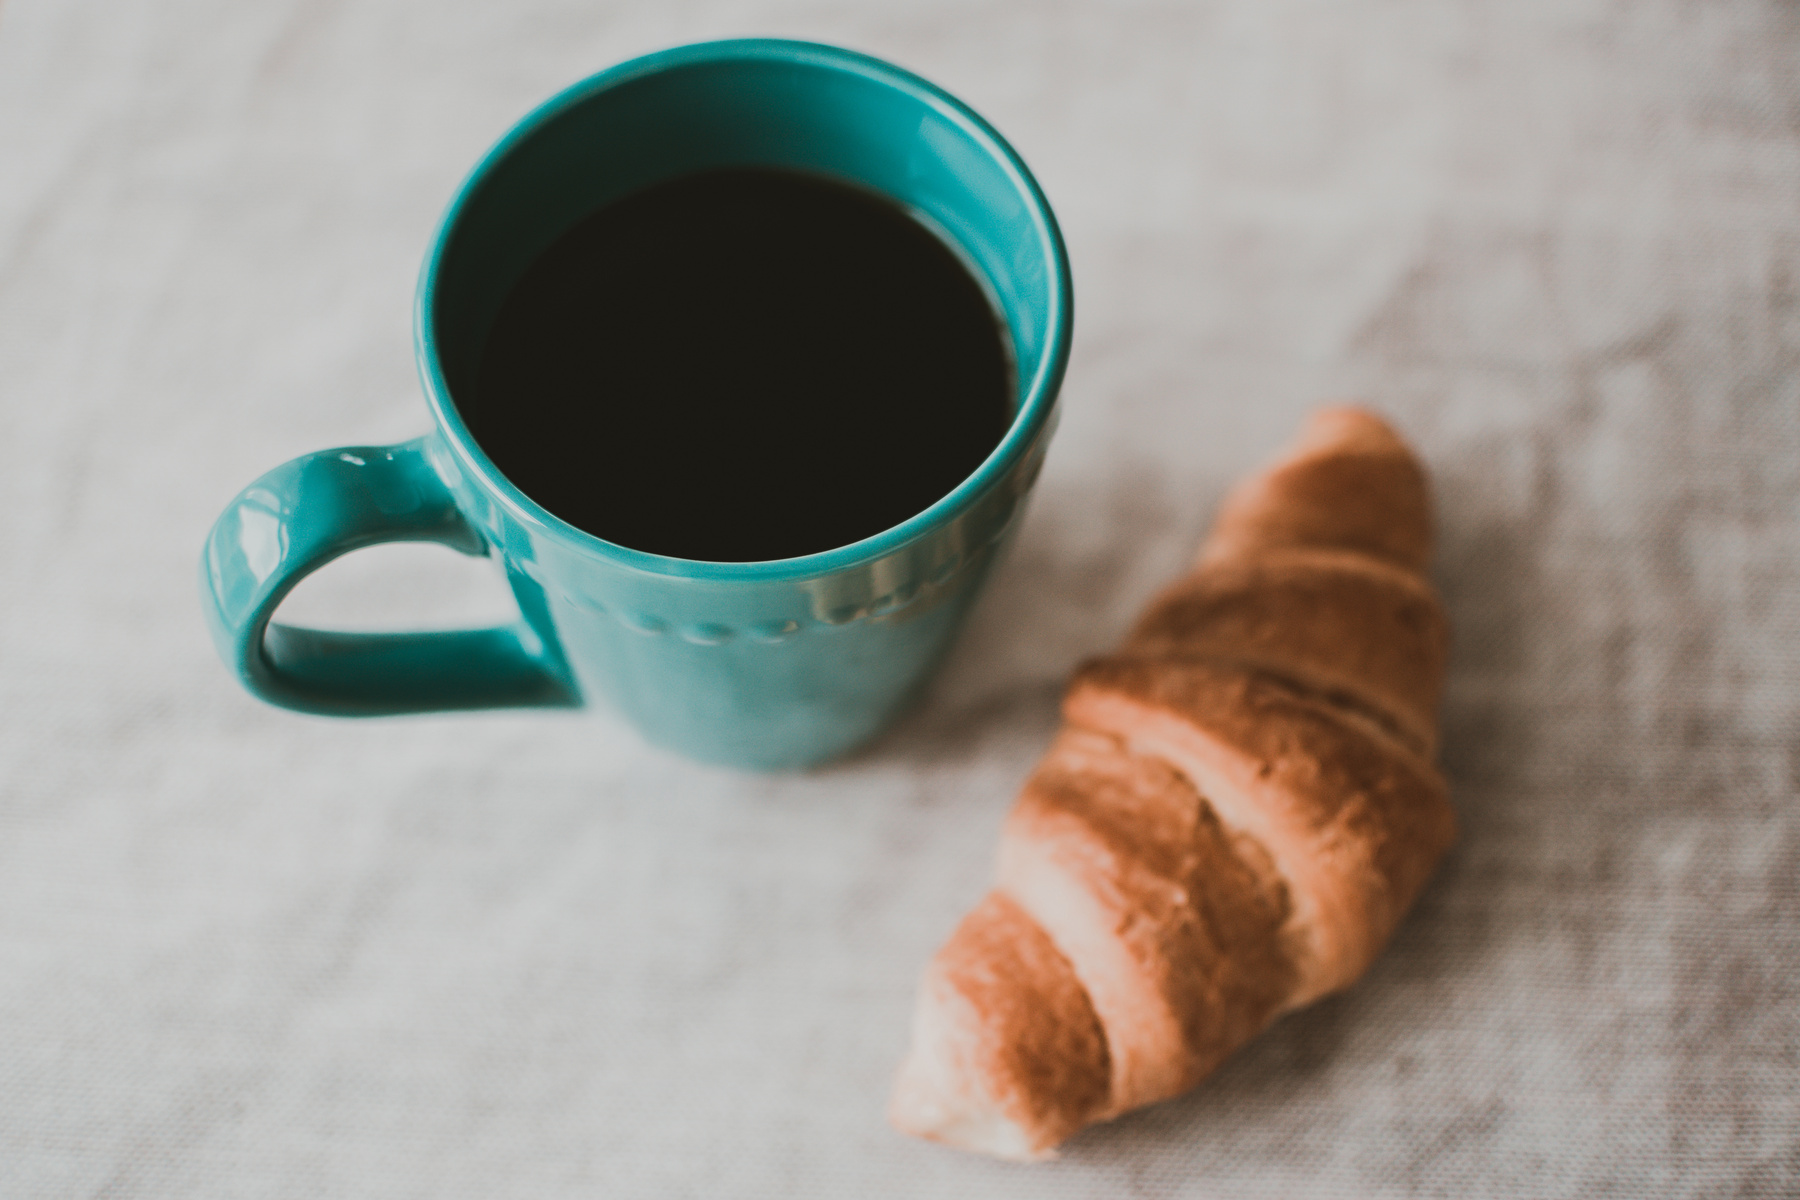 Teal Ceramic Mug Filled With Coffee Near Baked Bread